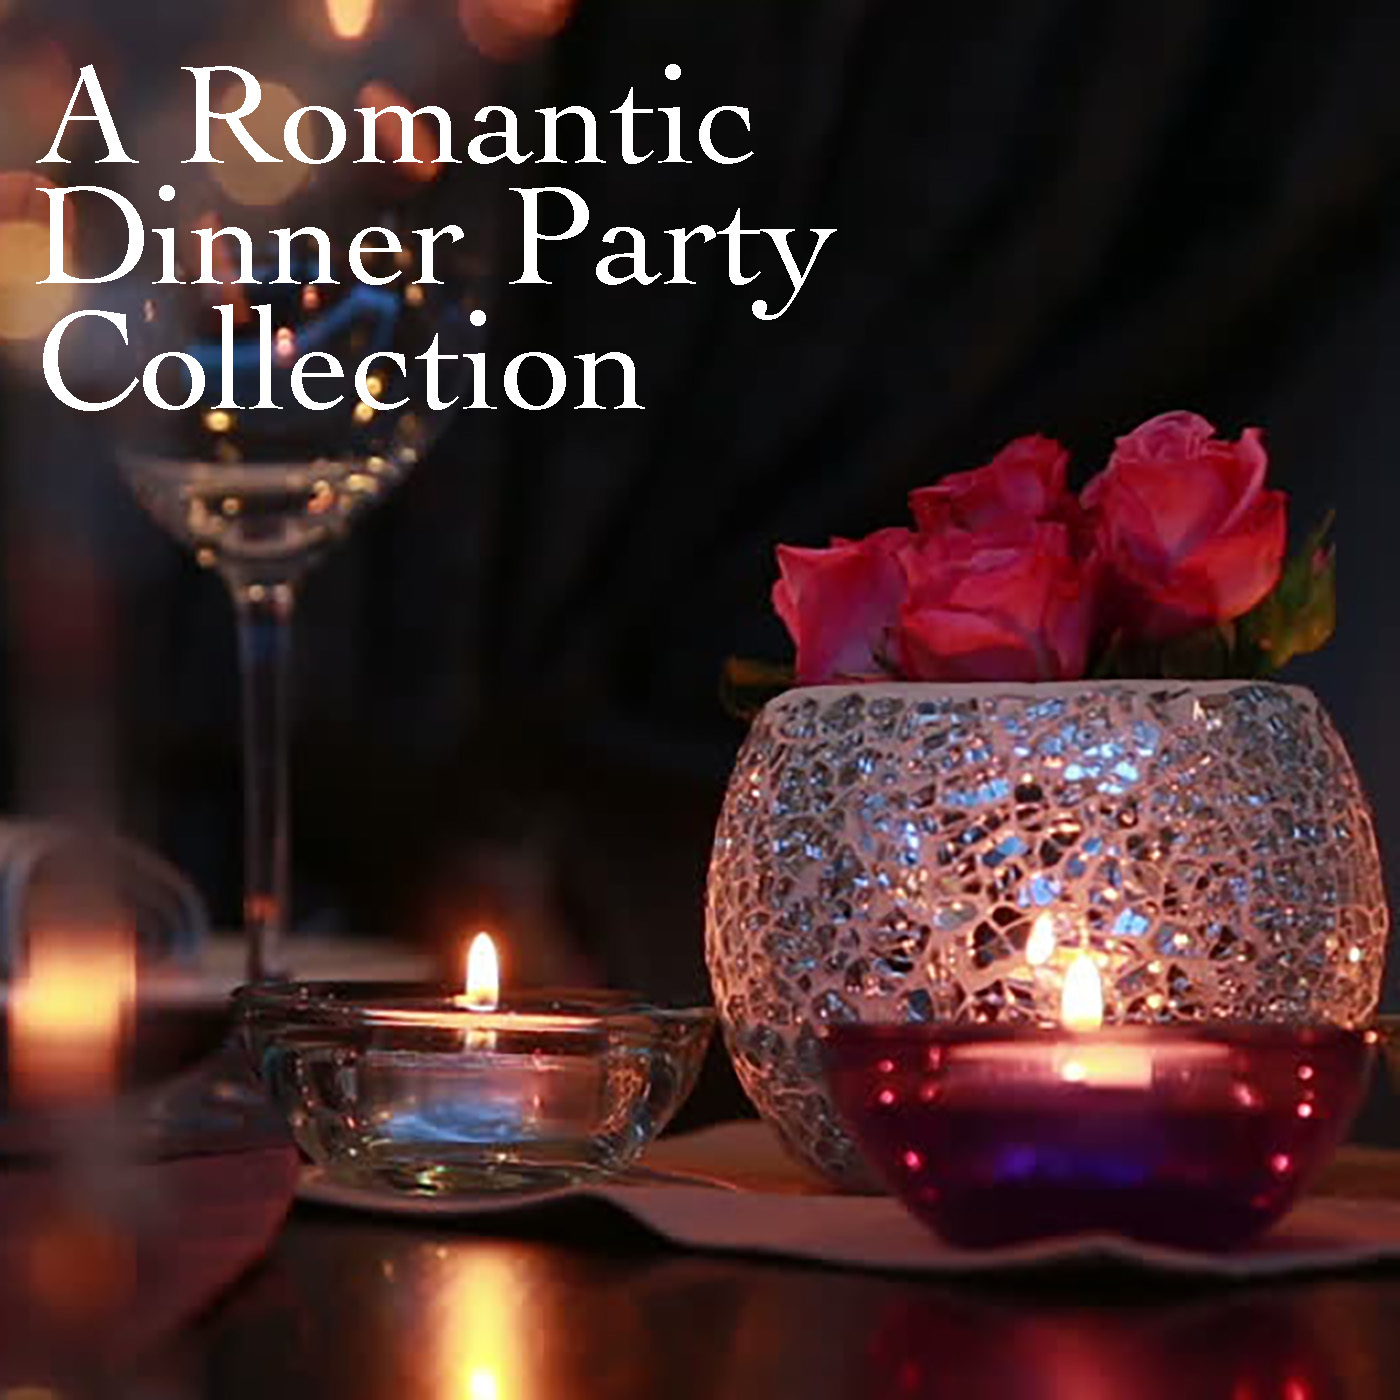 A Romantic Dinner Party Collection